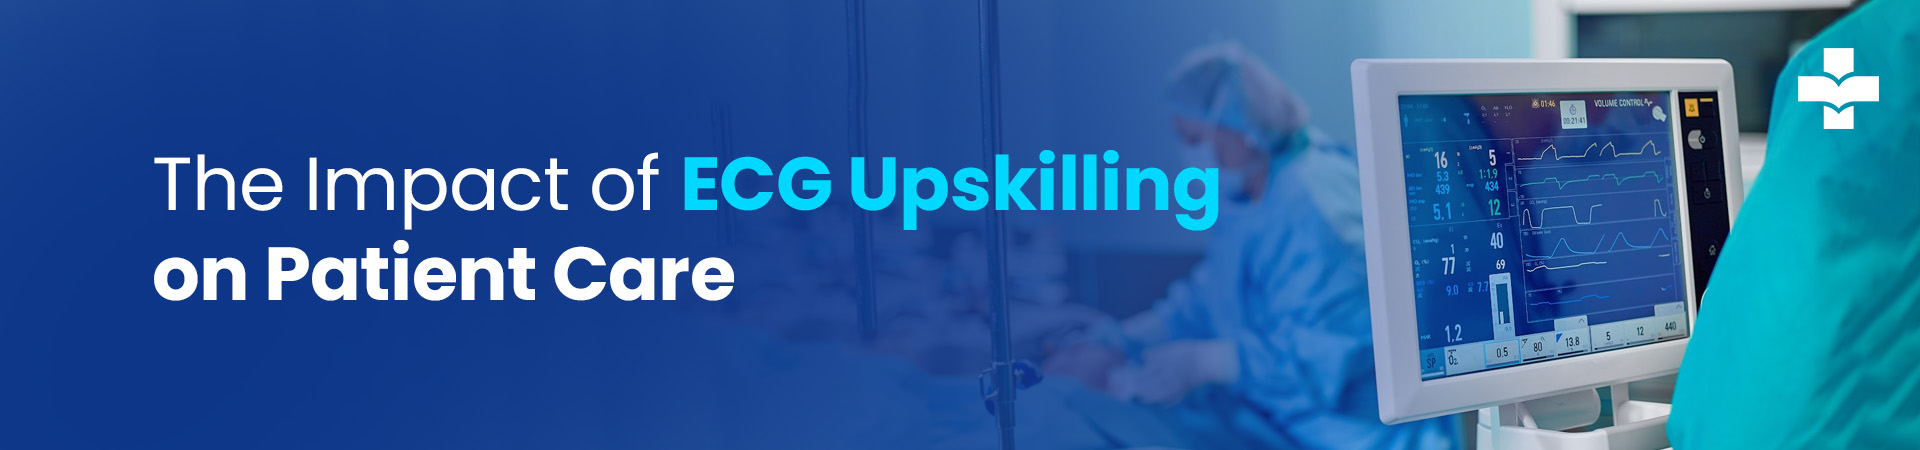 Impact of ECG Upskilling on Patient Care